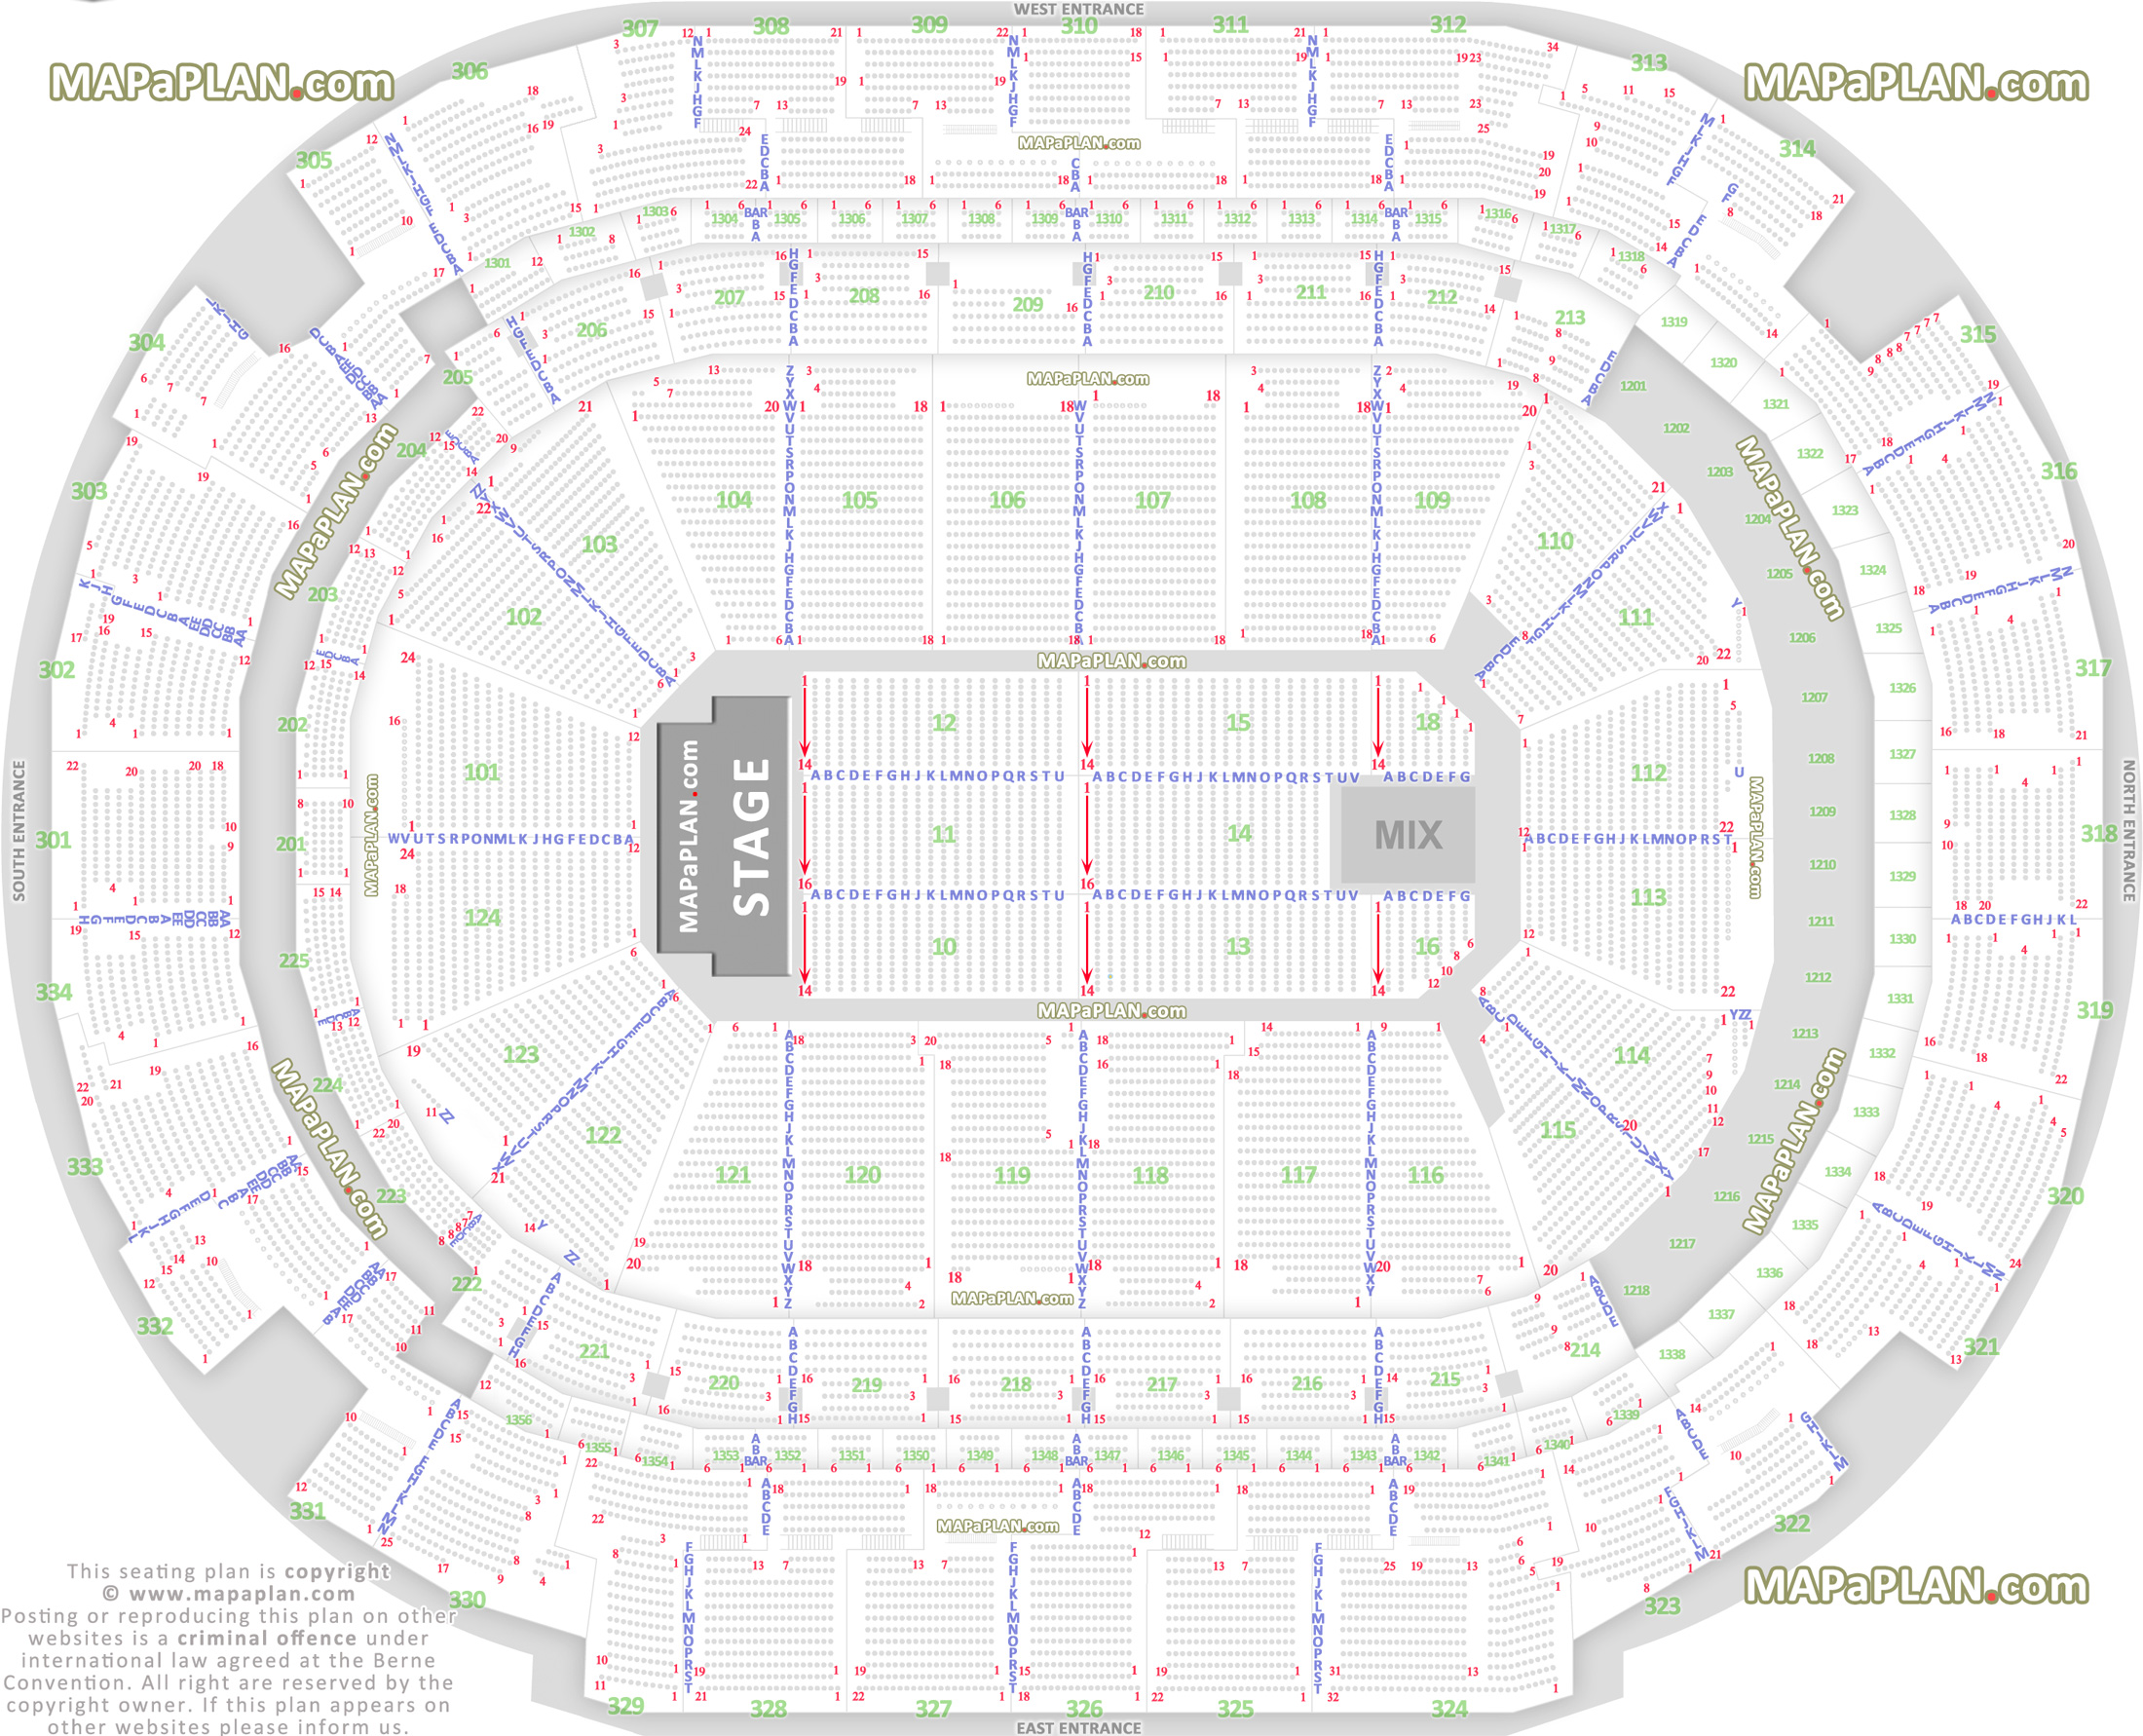 Dallas American Airlines Center End stage concert plan